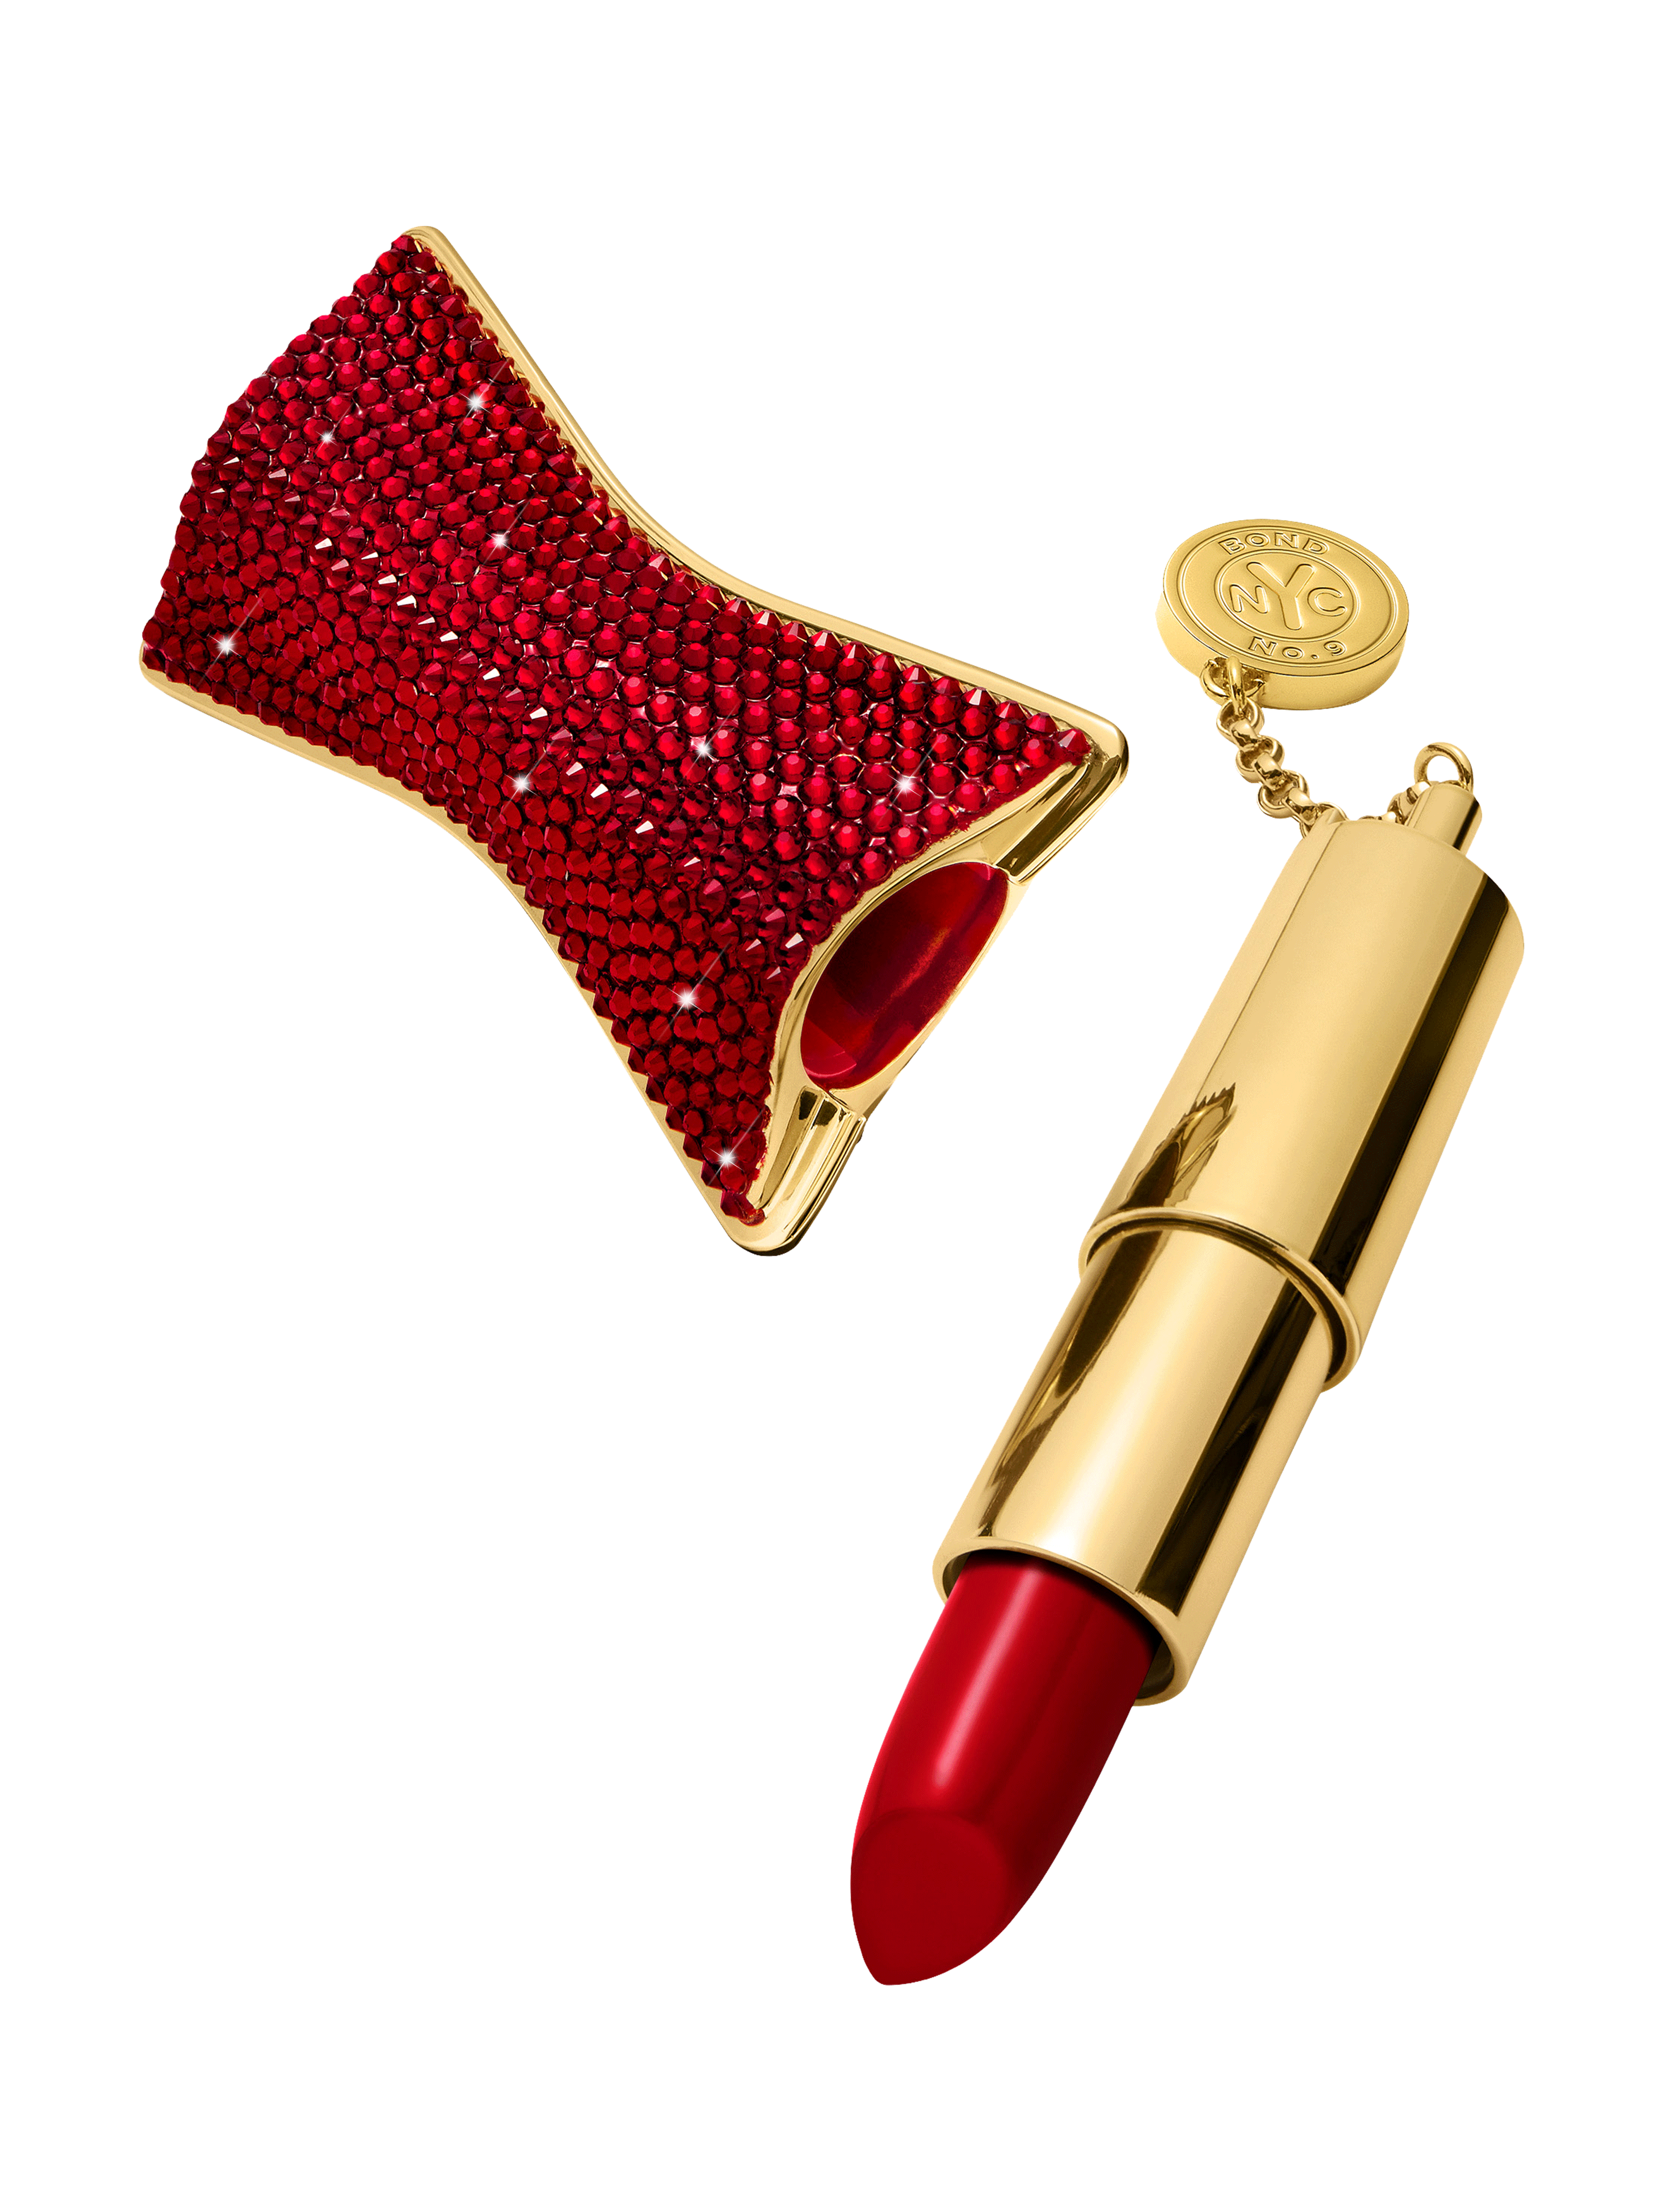 refillable lipstick with swarovski® crystals - chelsea